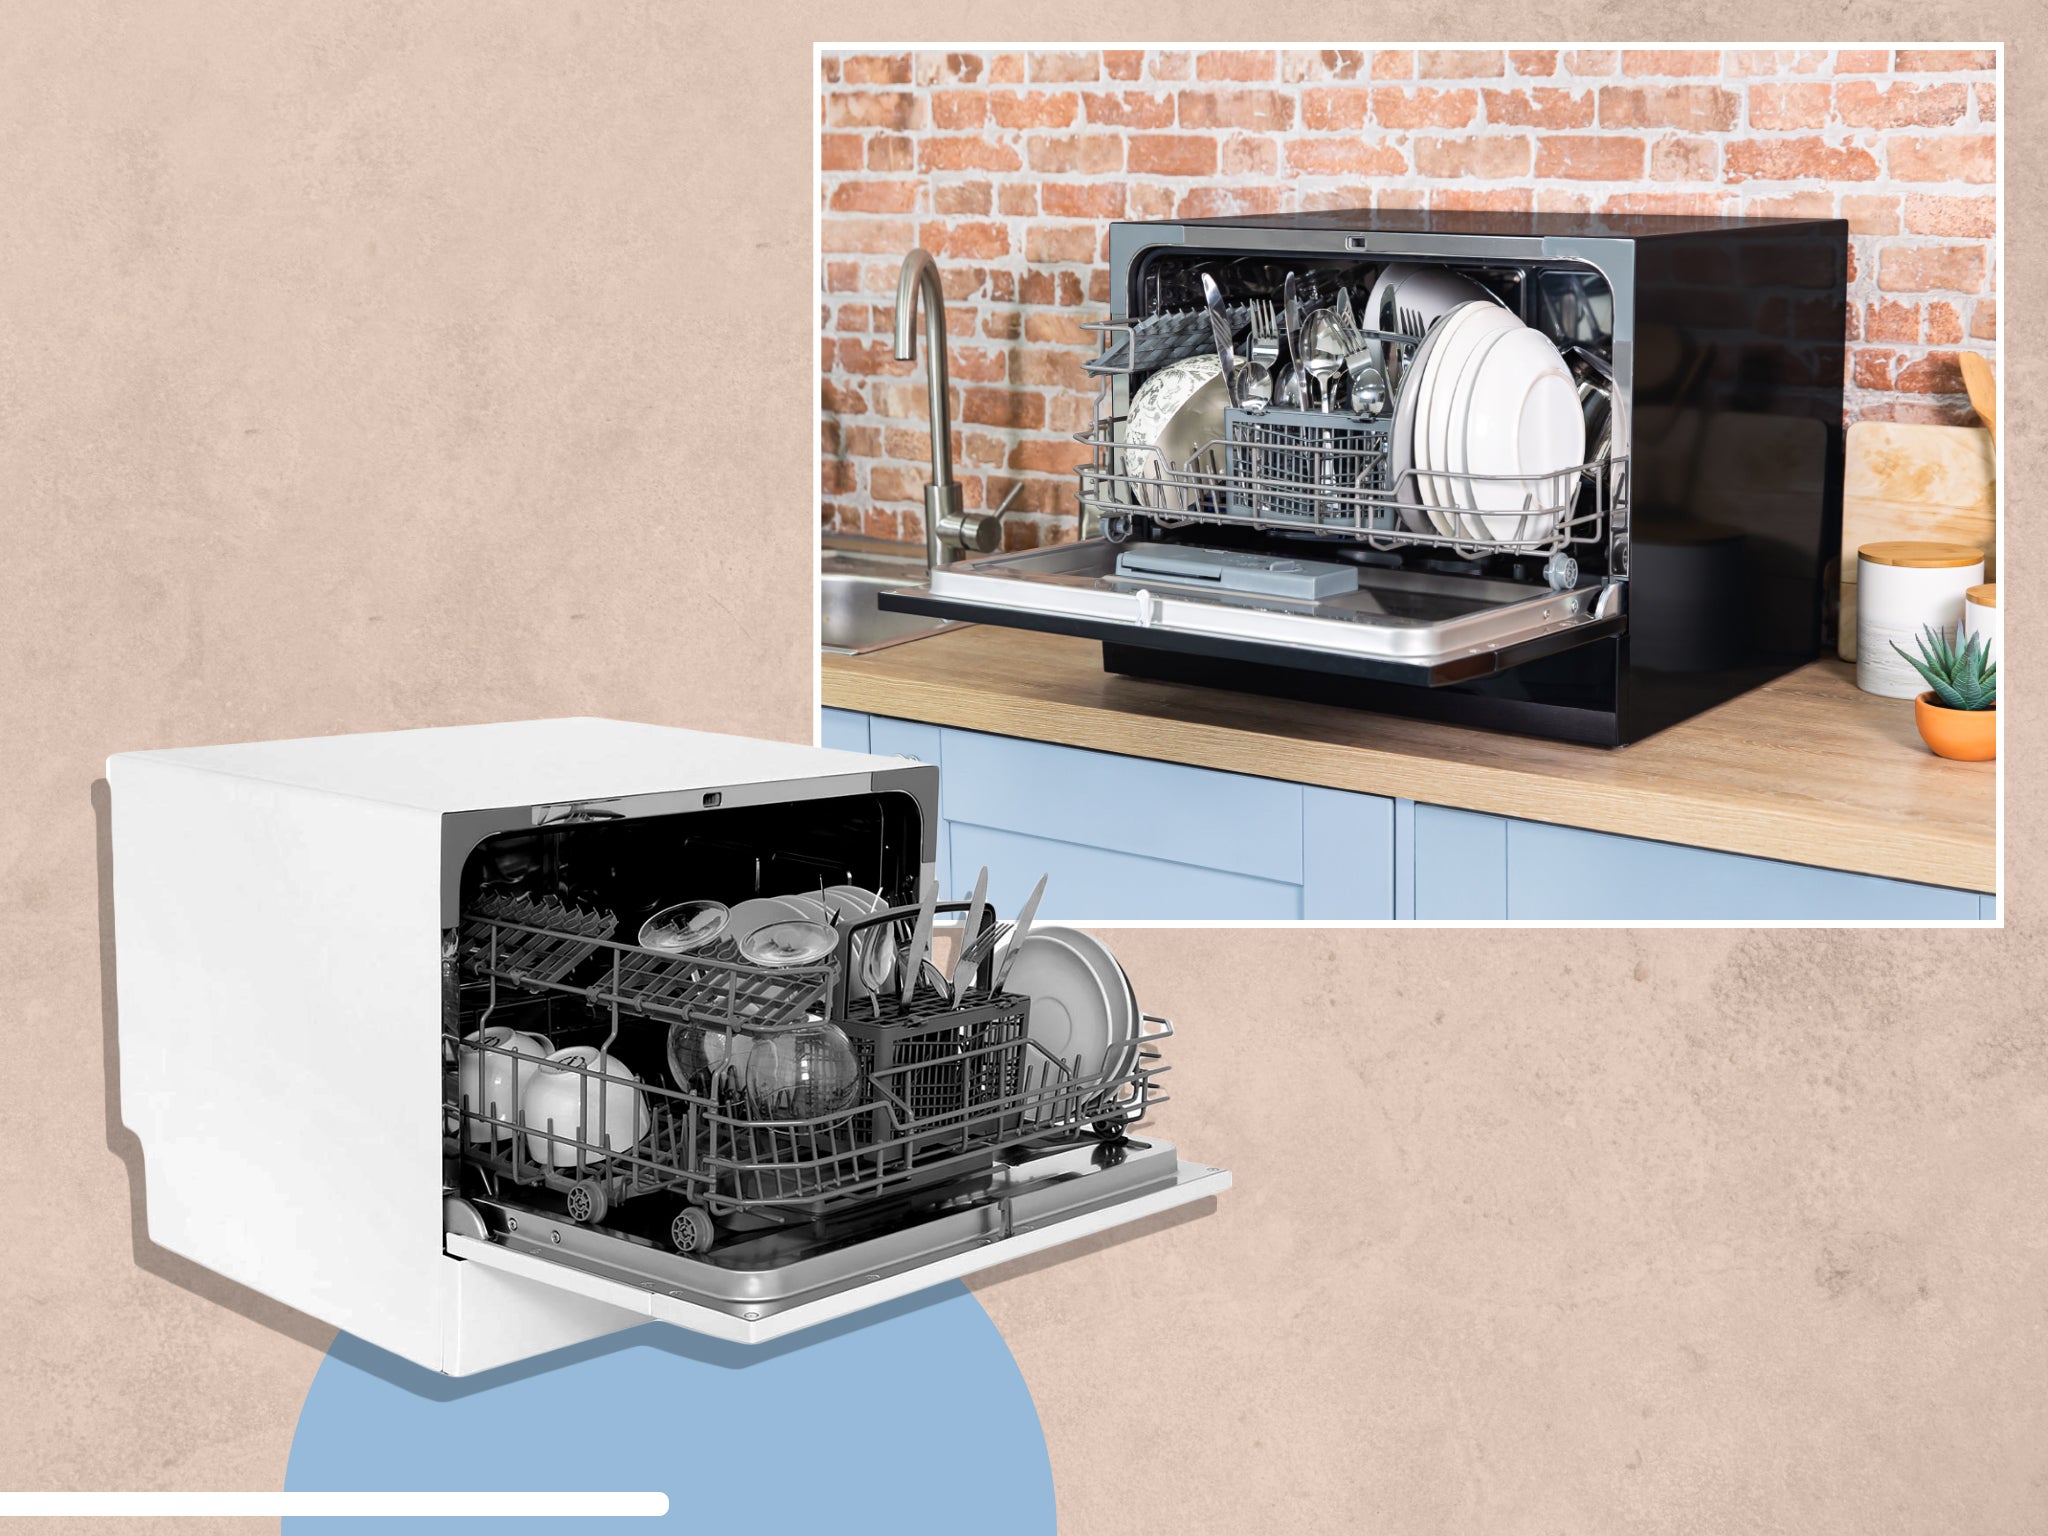  Portable Countertop Dishwasher,Mini Dishwasher With More Space  Inside,UV Hygiene& Auto Door Open,Countertop Dishwasher With 3 Washing  Programs & Air-Dry Function For Apartments, Dorms& Rvs : Appliances